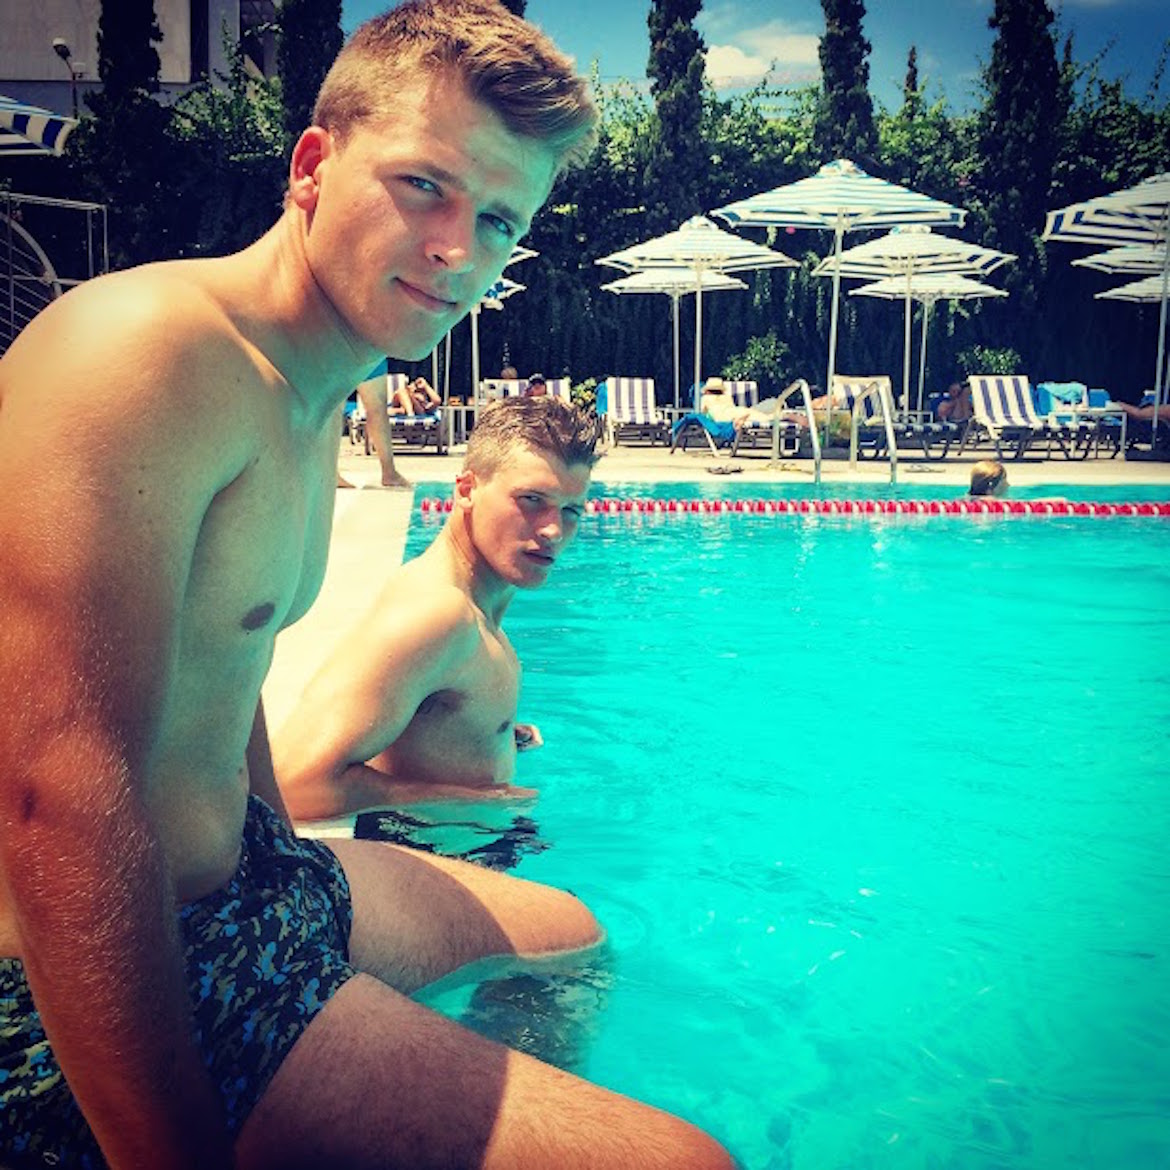 Miltos (left) & Ilias (right) at the Athens Hilton pool a hot mid-August afternoon...